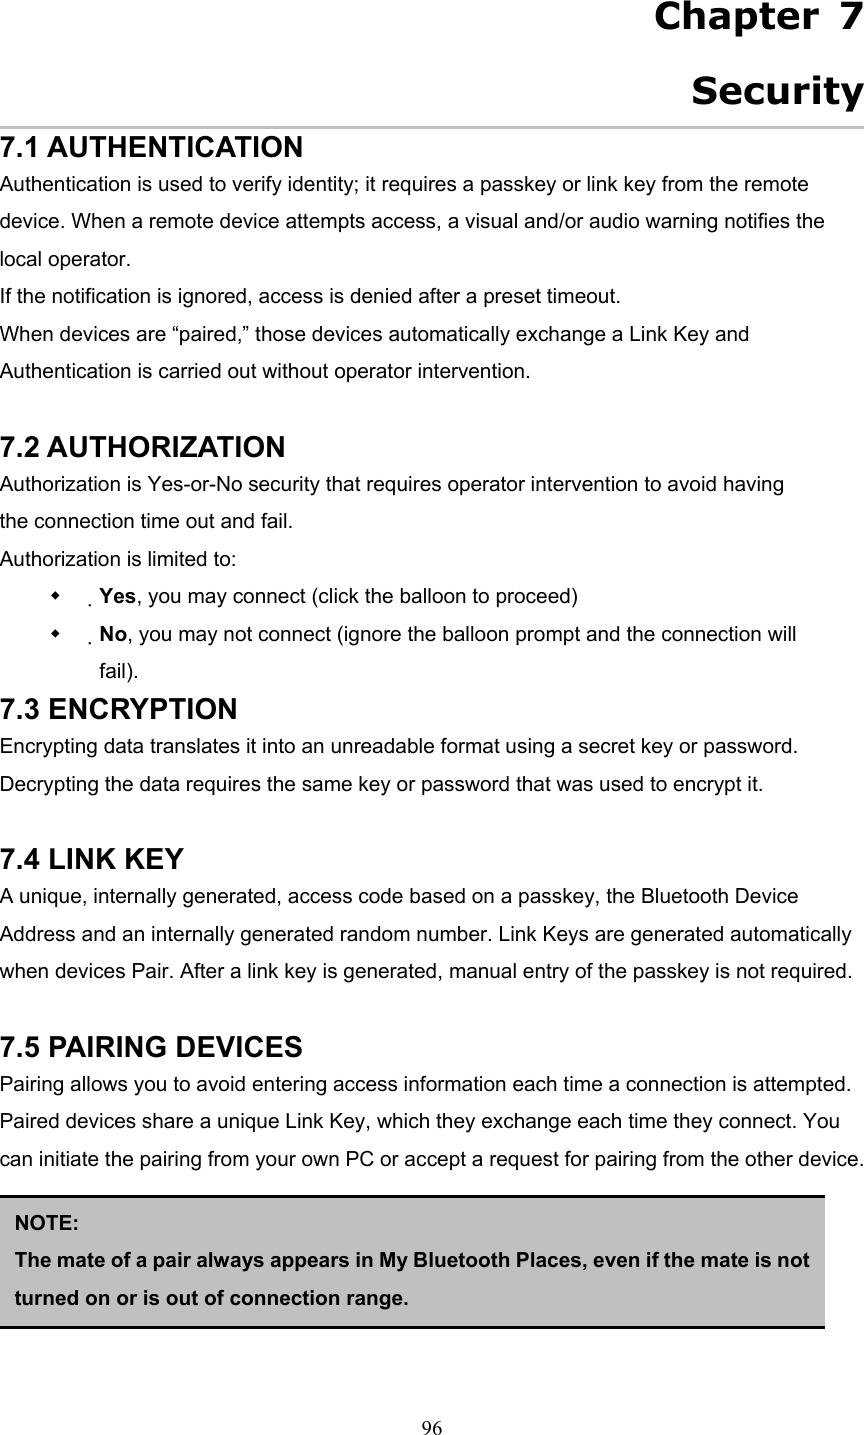  96   Chapter 7 Security 7.1 AUTHENTICATION Authentication is used to verify identity; it requires a passkey or link key from the remote device. When a remote device attempts access, a visual and/or audio warning notifies the local operator. If the notification is ignored, access is denied after a preset timeout. When devices are “paired,” those devices automatically exchange a Link Key and Authentication is carried out without operator intervention.  7.2 AUTHORIZATION Authorization is Yes-or-No security that requires operator intervention to avoid having the connection time out and fail. Authorization is limited to:   Yes, you may connect (click the balloon to proceed)   No, you may not connect (ignore the balloon prompt and the connection will fail). 7.3 ENCRYPTION Encrypting data translates it into an unreadable format using a secret key or password. Decrypting the data requires the same key or password that was used to encrypt it.  7.4 LINK KEY A unique, internally generated, access code based on a passkey, the Bluetooth Device Address and an internally generated random number. Link Keys are generated automatically when devices Pair. After a link key is generated, manual entry of the passkey is not required.  7.5 PAIRING DEVICES Pairing allows you to avoid entering access information each time a connection is attempted. Paired devices share a unique Link Key, which they exchange each time they connect. You can initiate the pairing from your own PC or accept a request for pairing from the other device.      NOTE:  The mate of a pair always appears in My Bluetooth Places, even if the mate is notturned on or is out of connection range. 